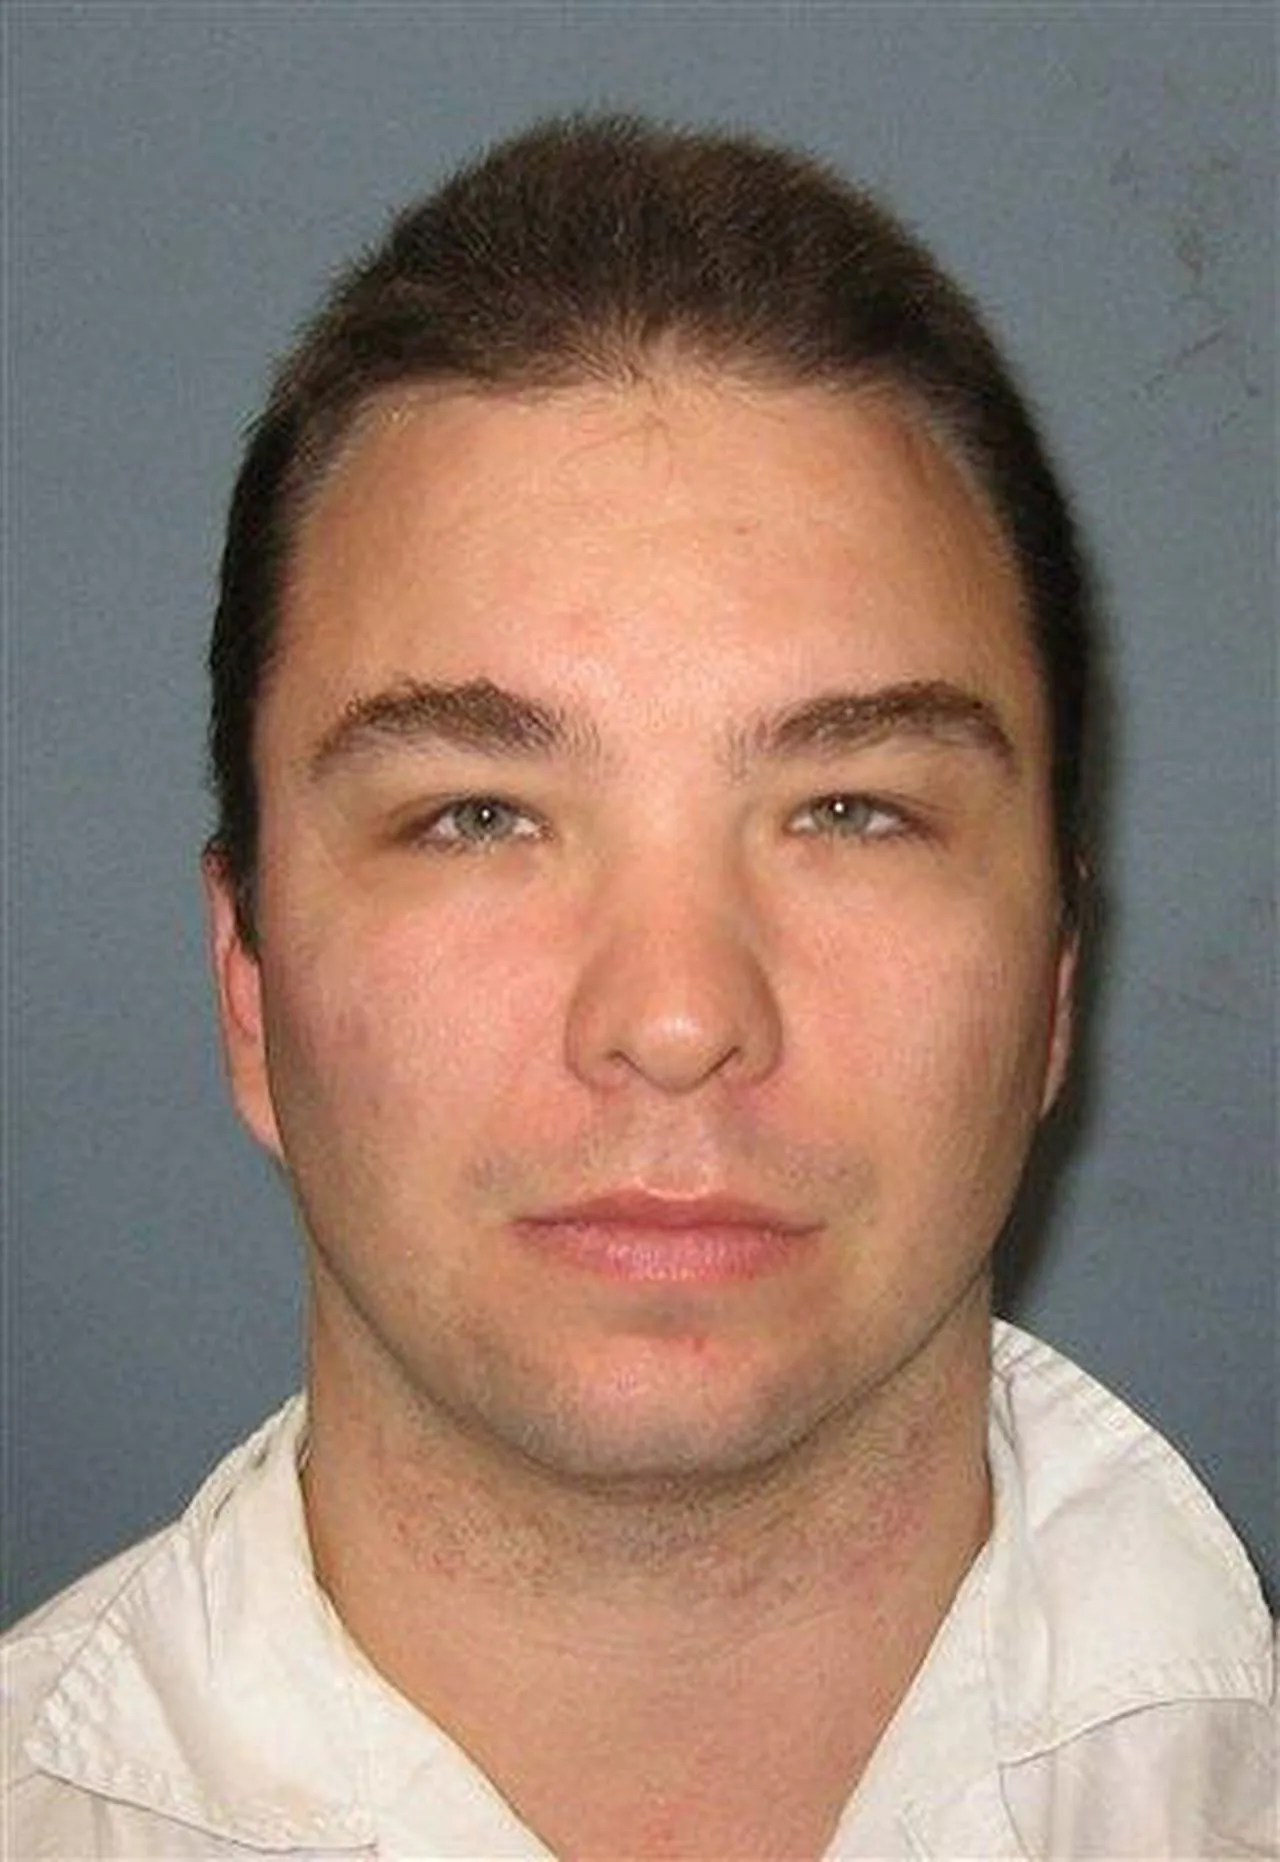 Alabama executes Michael Jeffrey Land for 1992 murder of Candace Brown